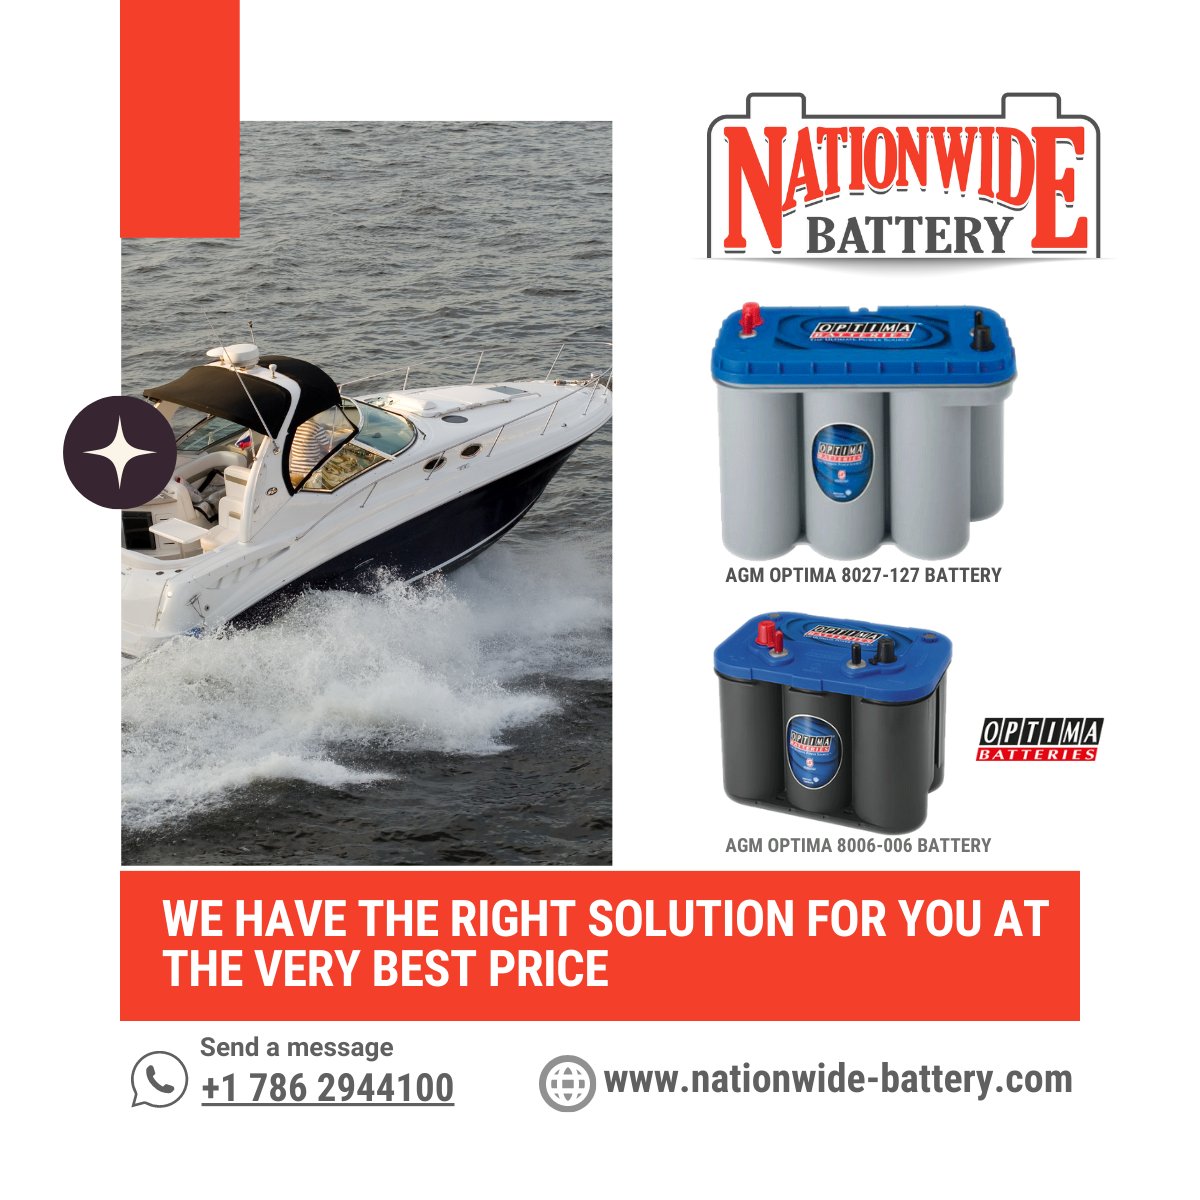 The BLUETOP® battery is a high performance AGM with exceptional operating time and more recharges than traditional batteries. 

If you need advice on the best marine #battery or need last-minute battery replacement, contact us at 📞+1-954-527-4640

#OptimaBattery #HighPerformance